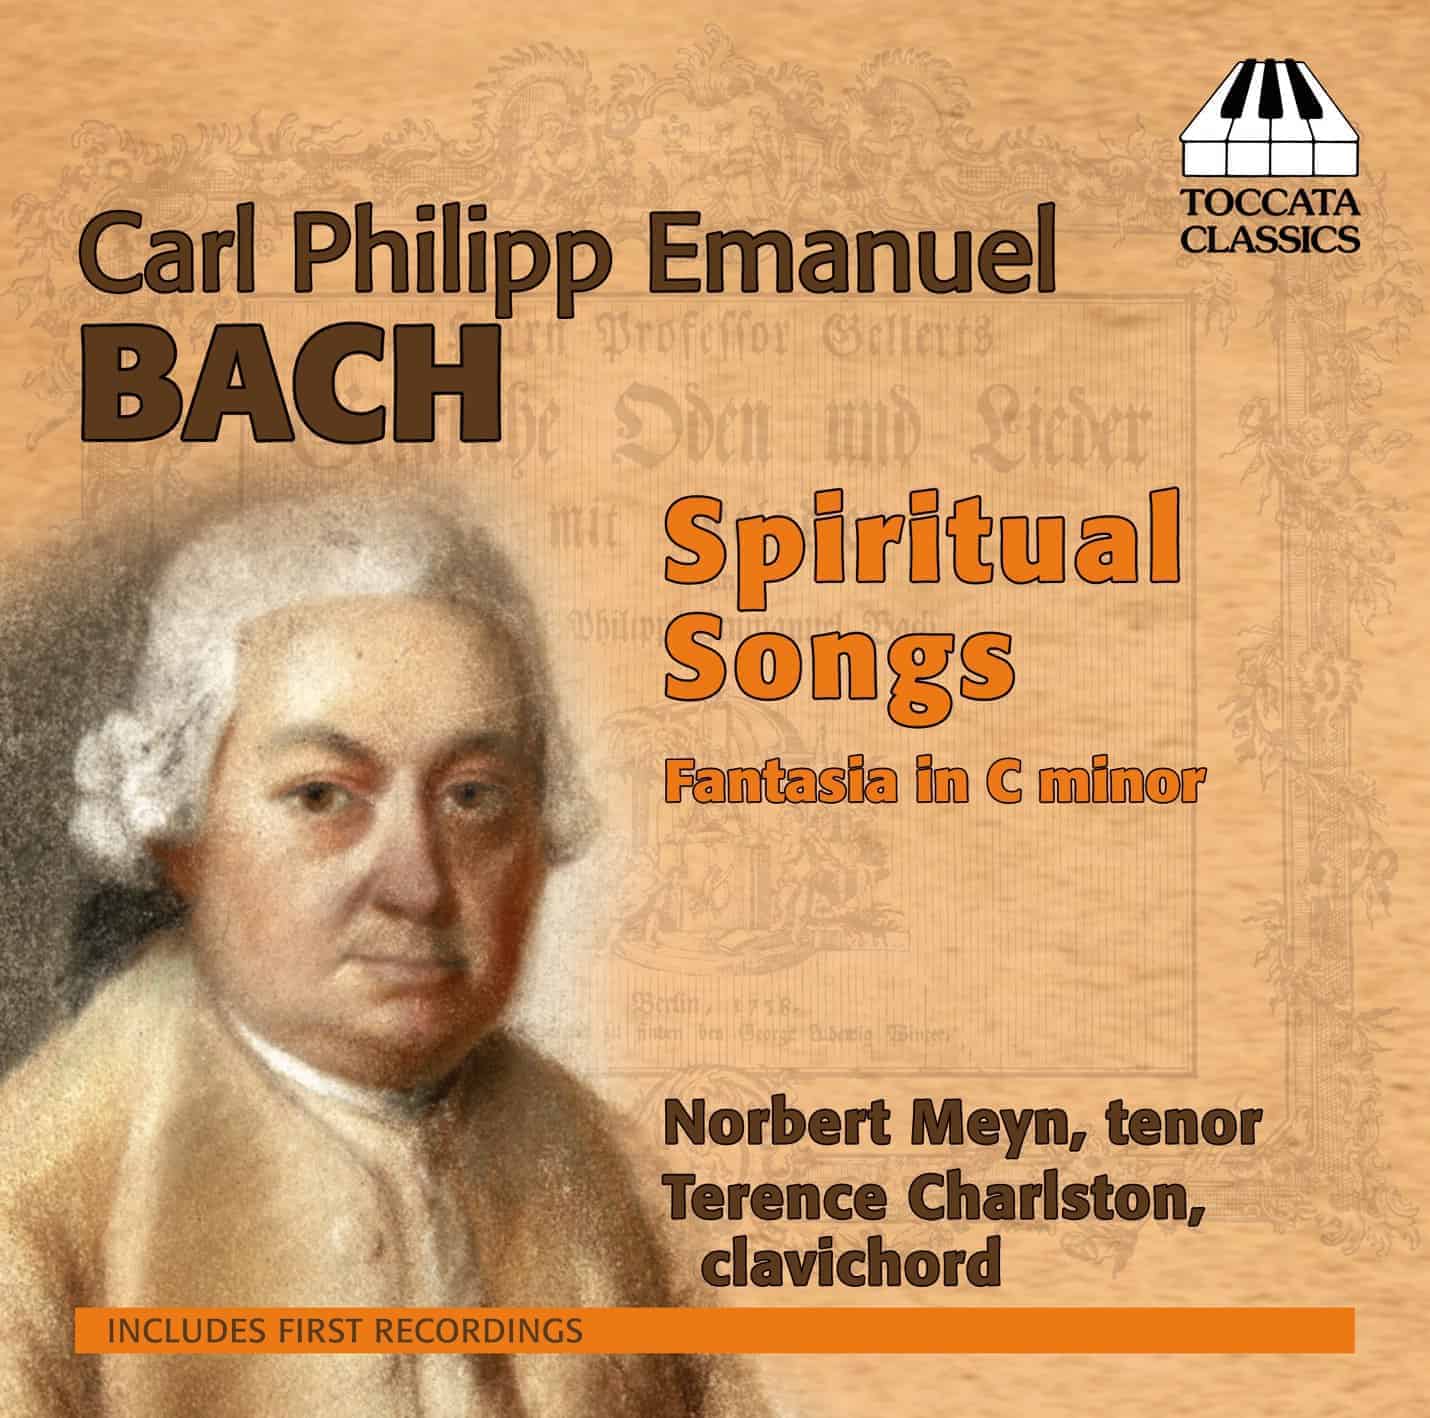 Norbert Meyn Podcast about CPE Bach Spiritual Songs